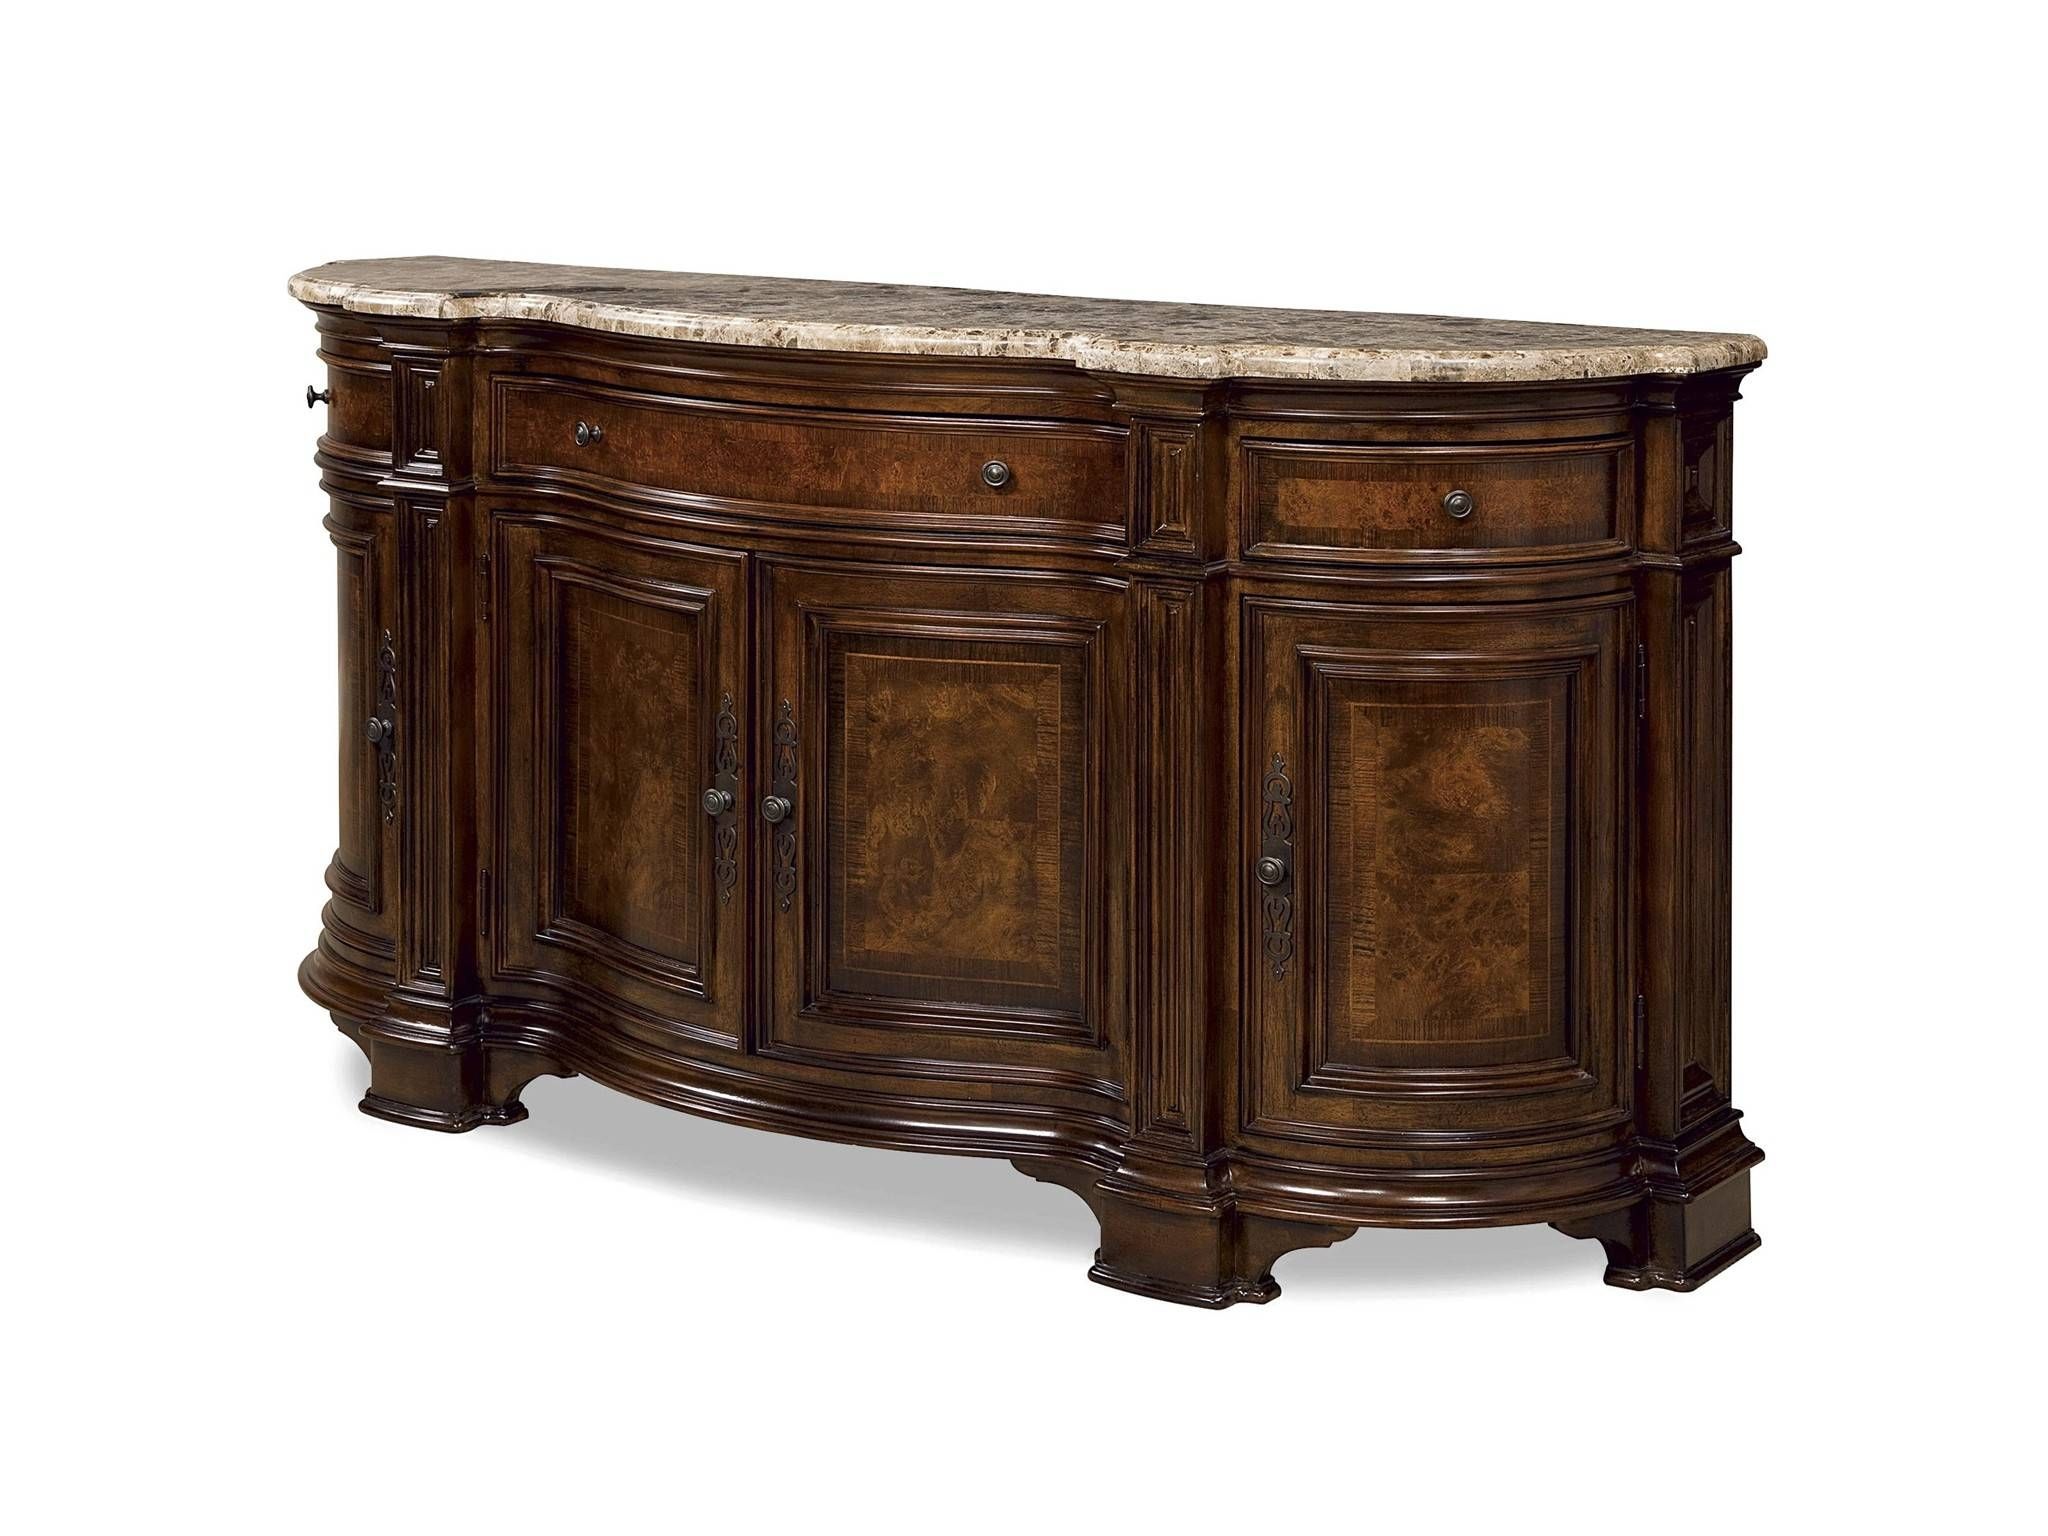 Buy Villa Cortina Sideboard Credenza With Marble Topuniversal Regarding Recent Marble Top Sideboards (View 2 of 15)